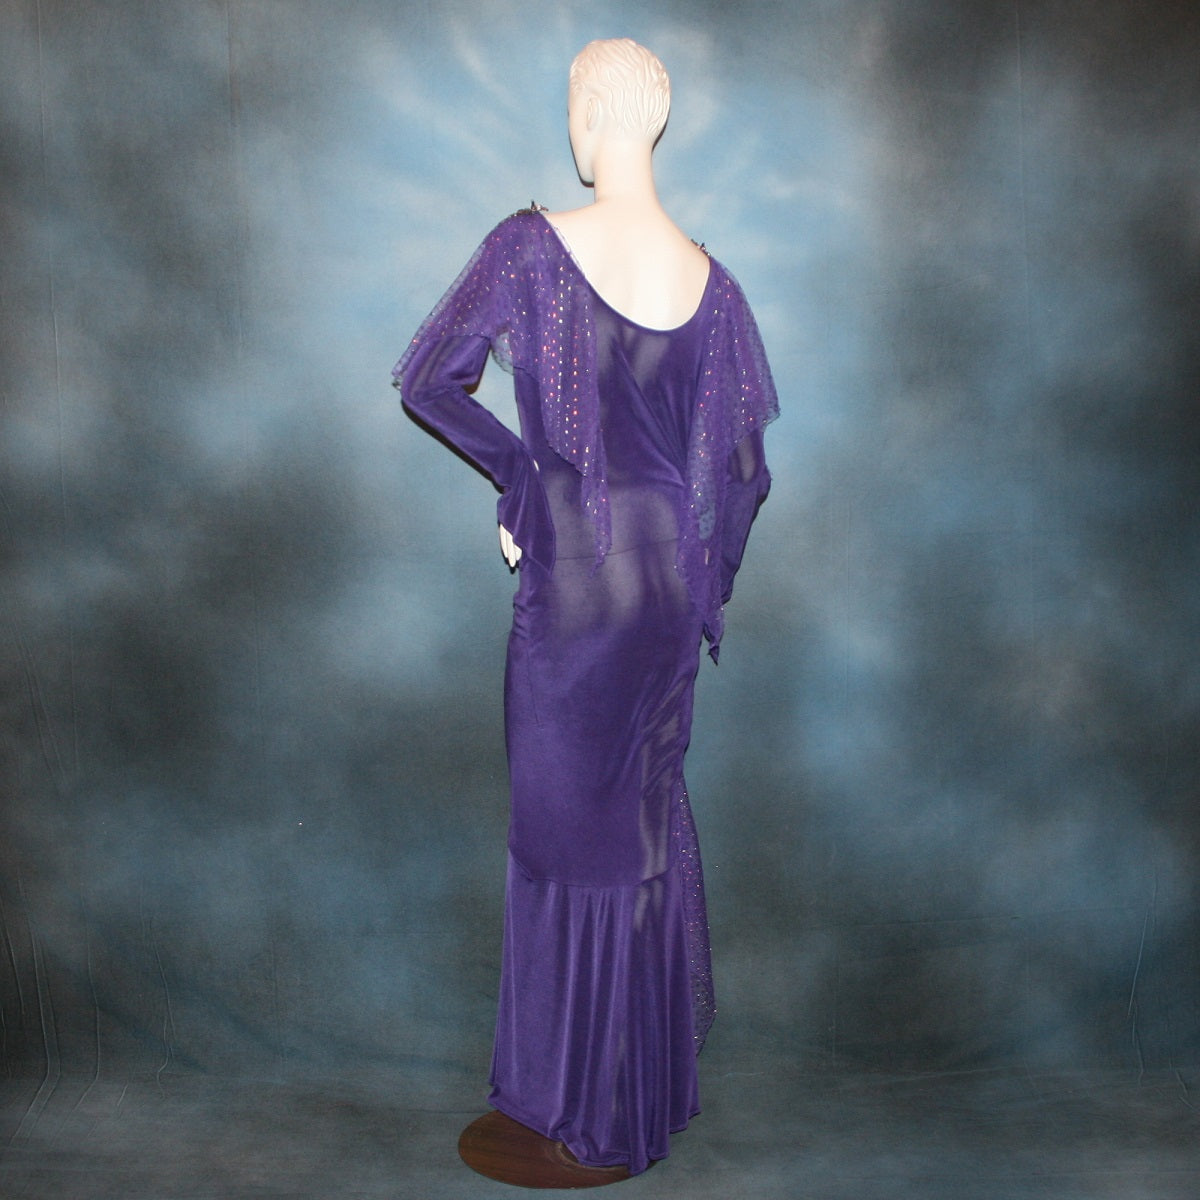 back view of Crystal's Creations Purple Latin/rhythm/tango dress created of deep grape purple solid slinky with a touch of Swarovski rhinestone work done in metallic light gold & deep velvet purple, along with some hand beading & some gorgeous glittery floats.